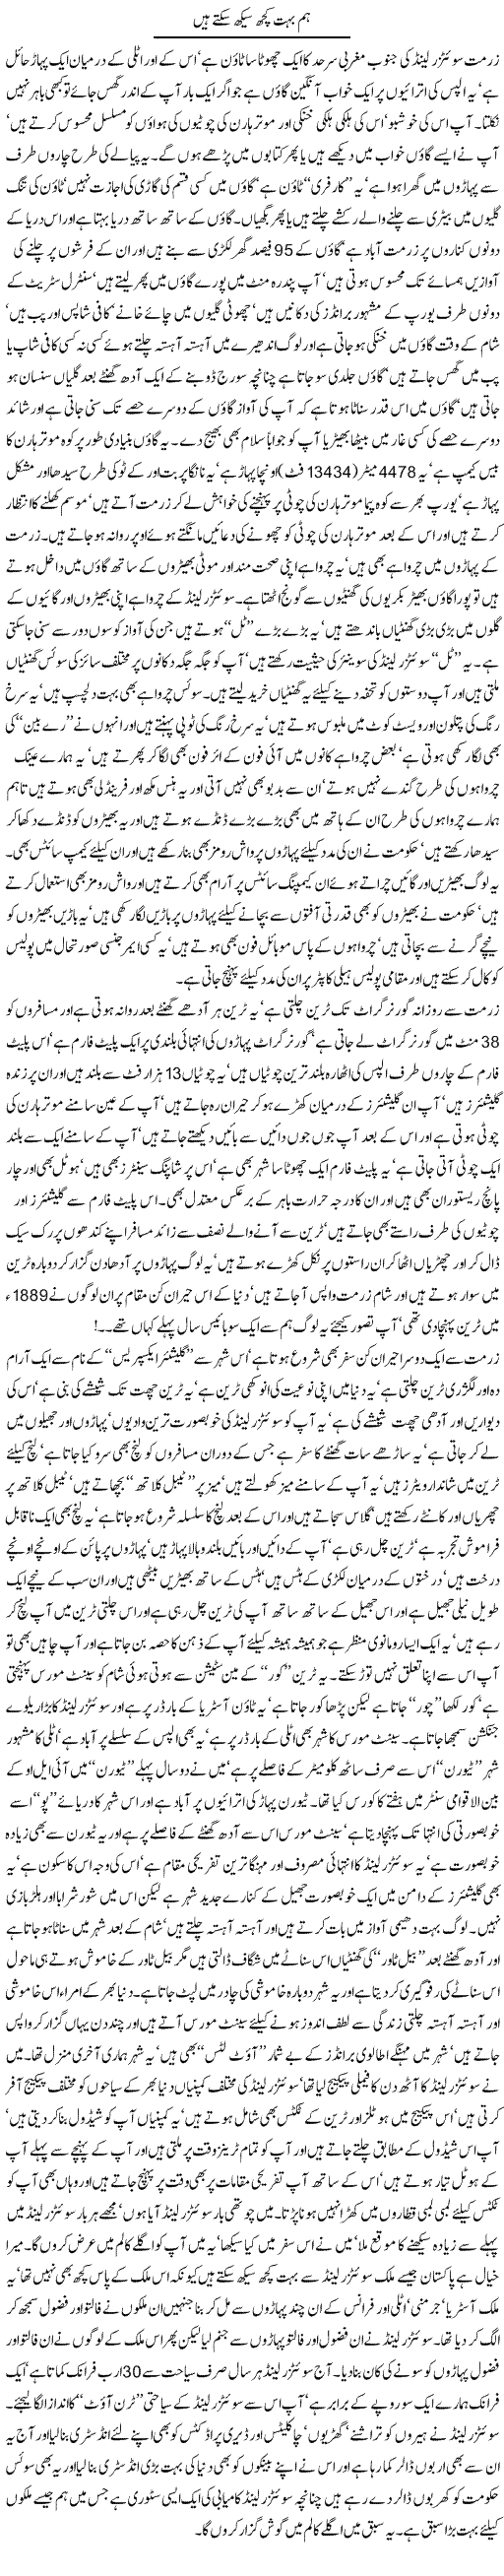 We Can Learn Anything Express Column Javed Chaudhry 19 July 2011